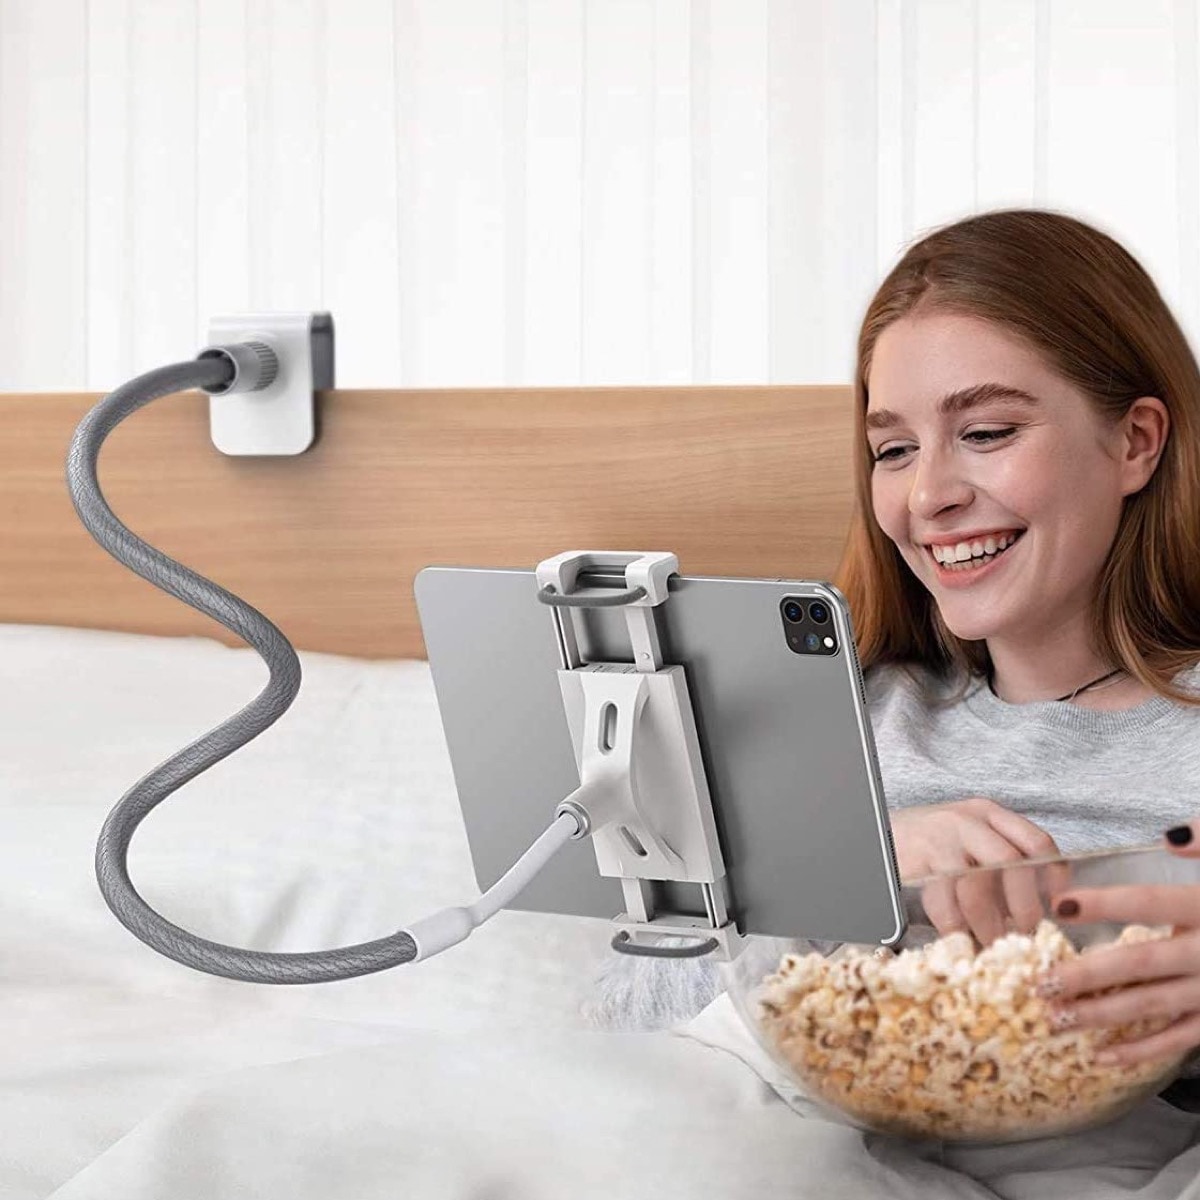 Flexible neck iPad holder for hands-free watching